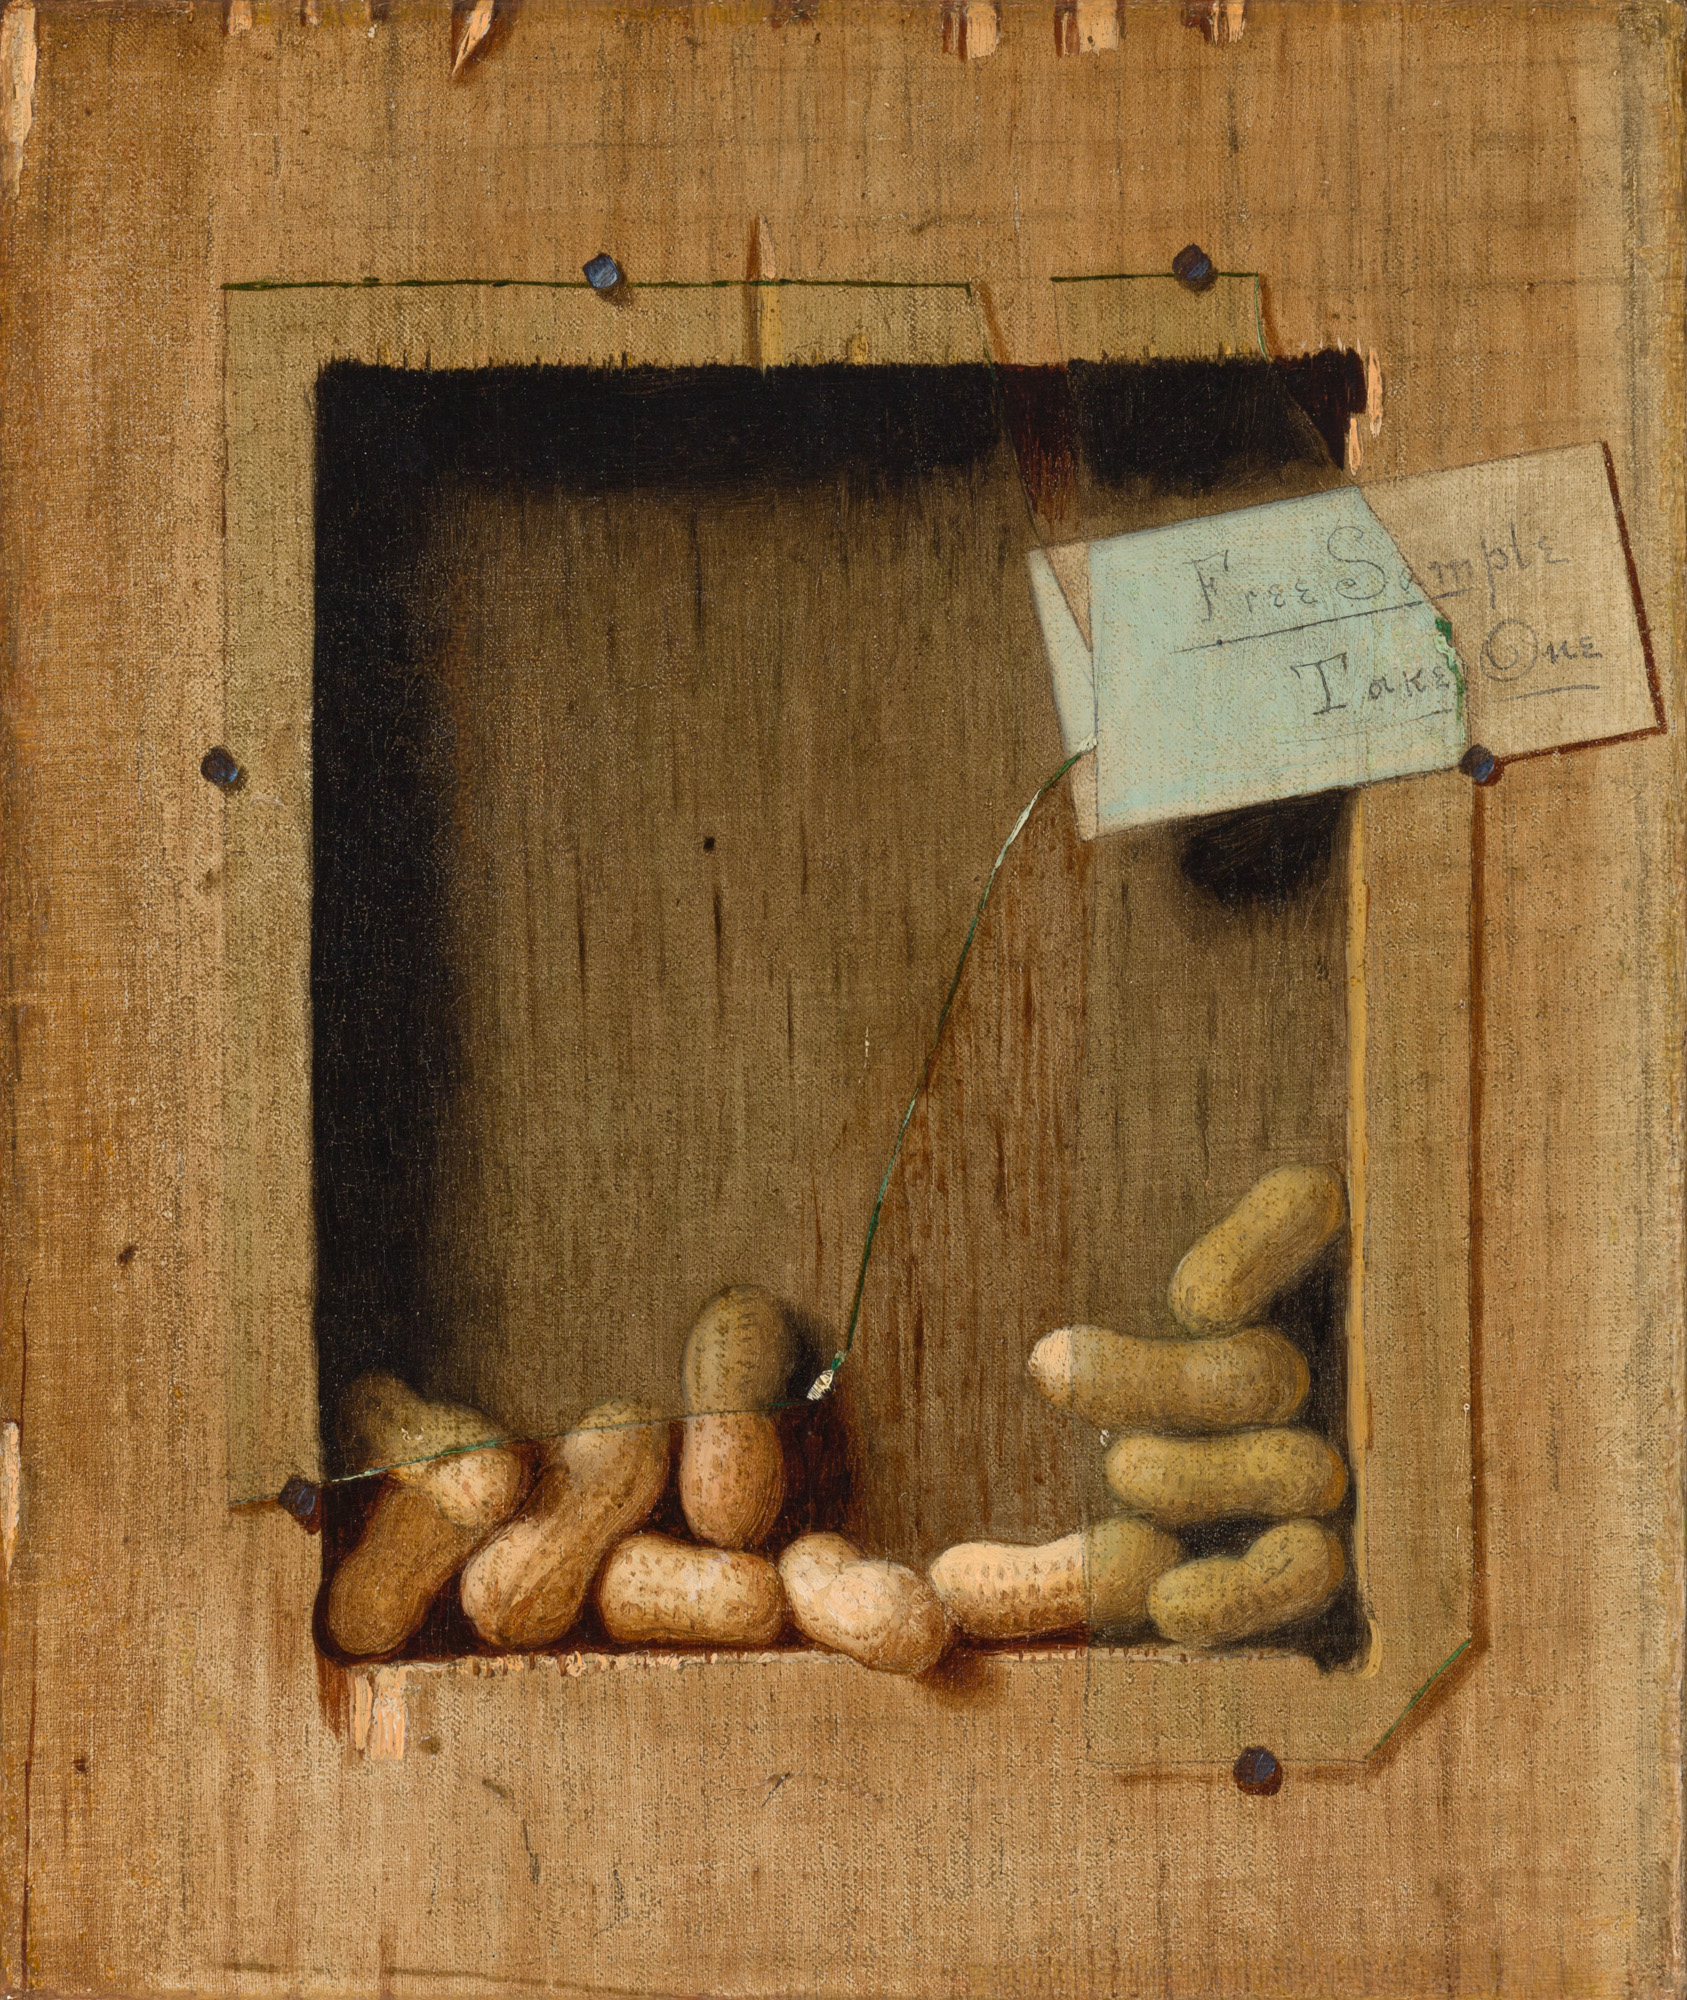 This Tromp L'oeil piece features a broken cupboard with peanuts falling out. There is a sign stuck into the glass that reads "Free Sample, Take One" inviting the viewer in.